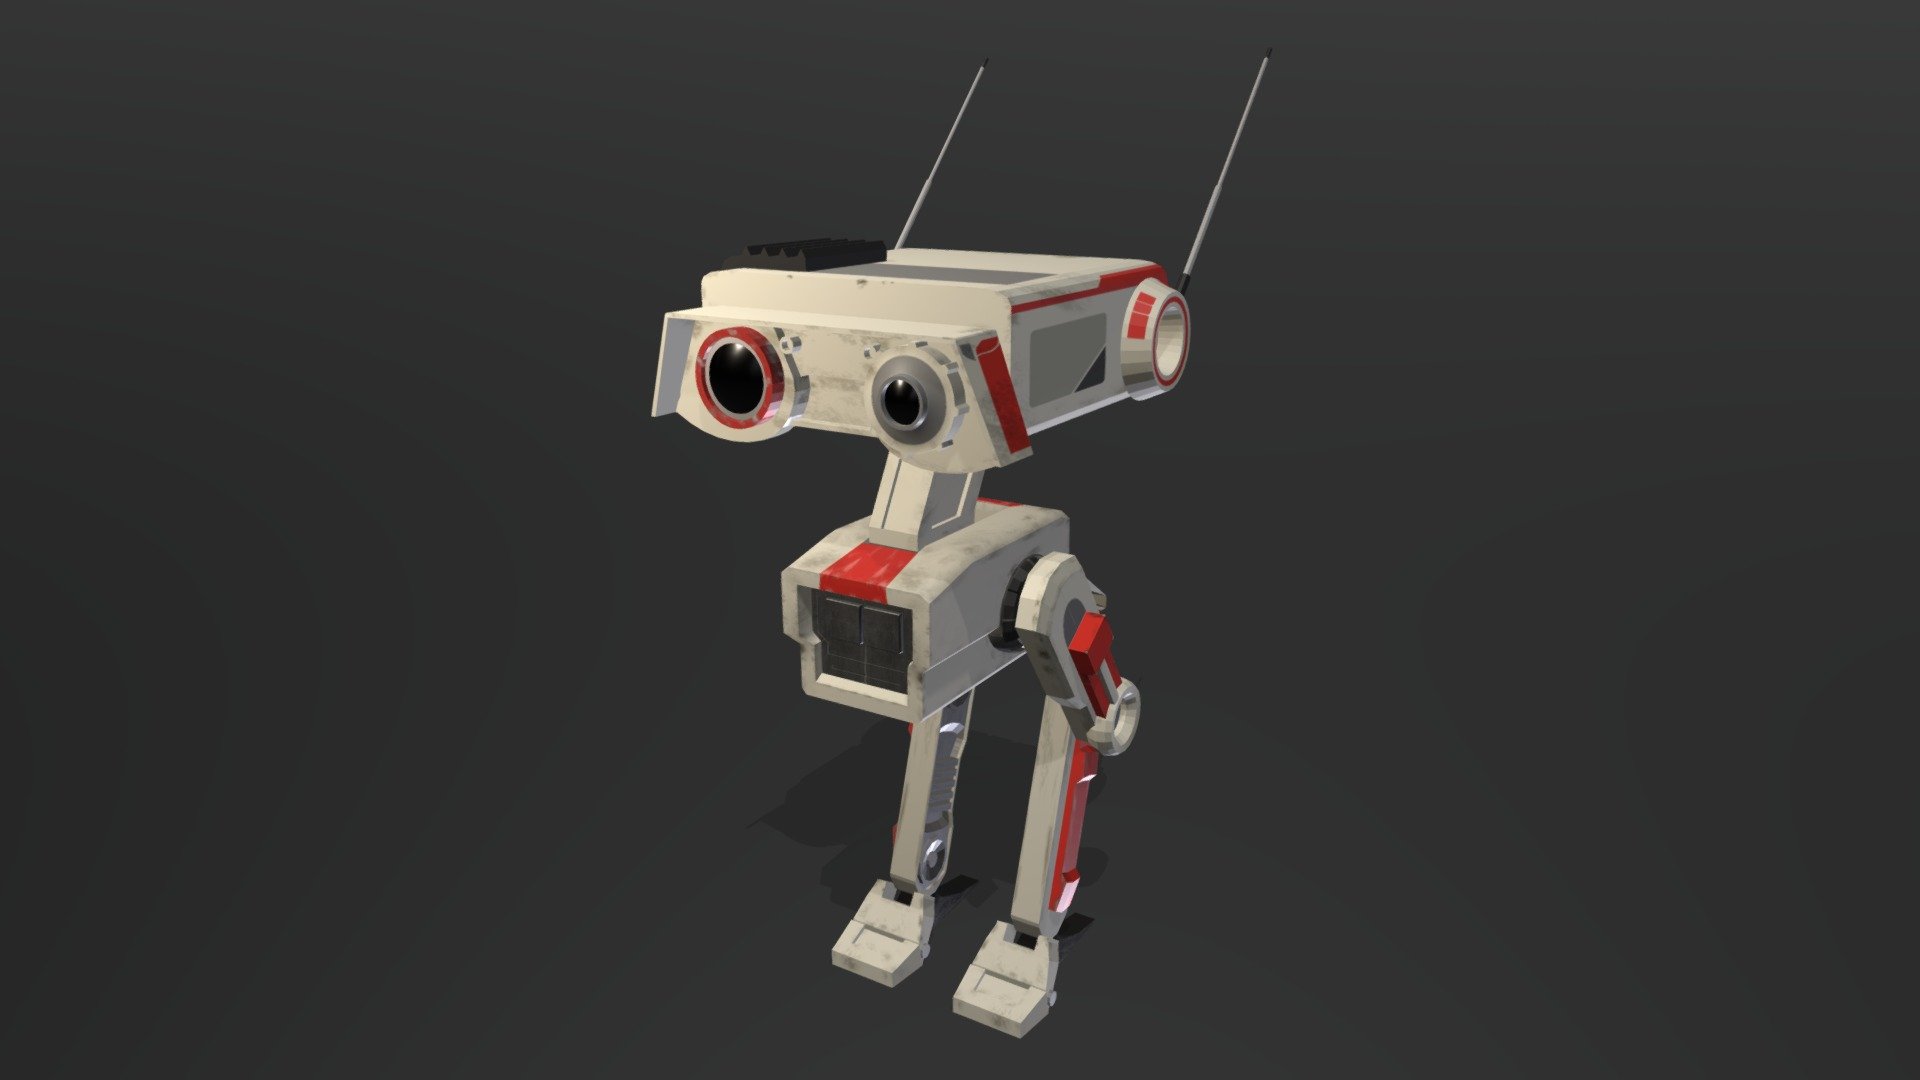 Rigged Model Of BD 1 From Star Wars Fallen Order Free 3D Model By Todor [9e9de9d]